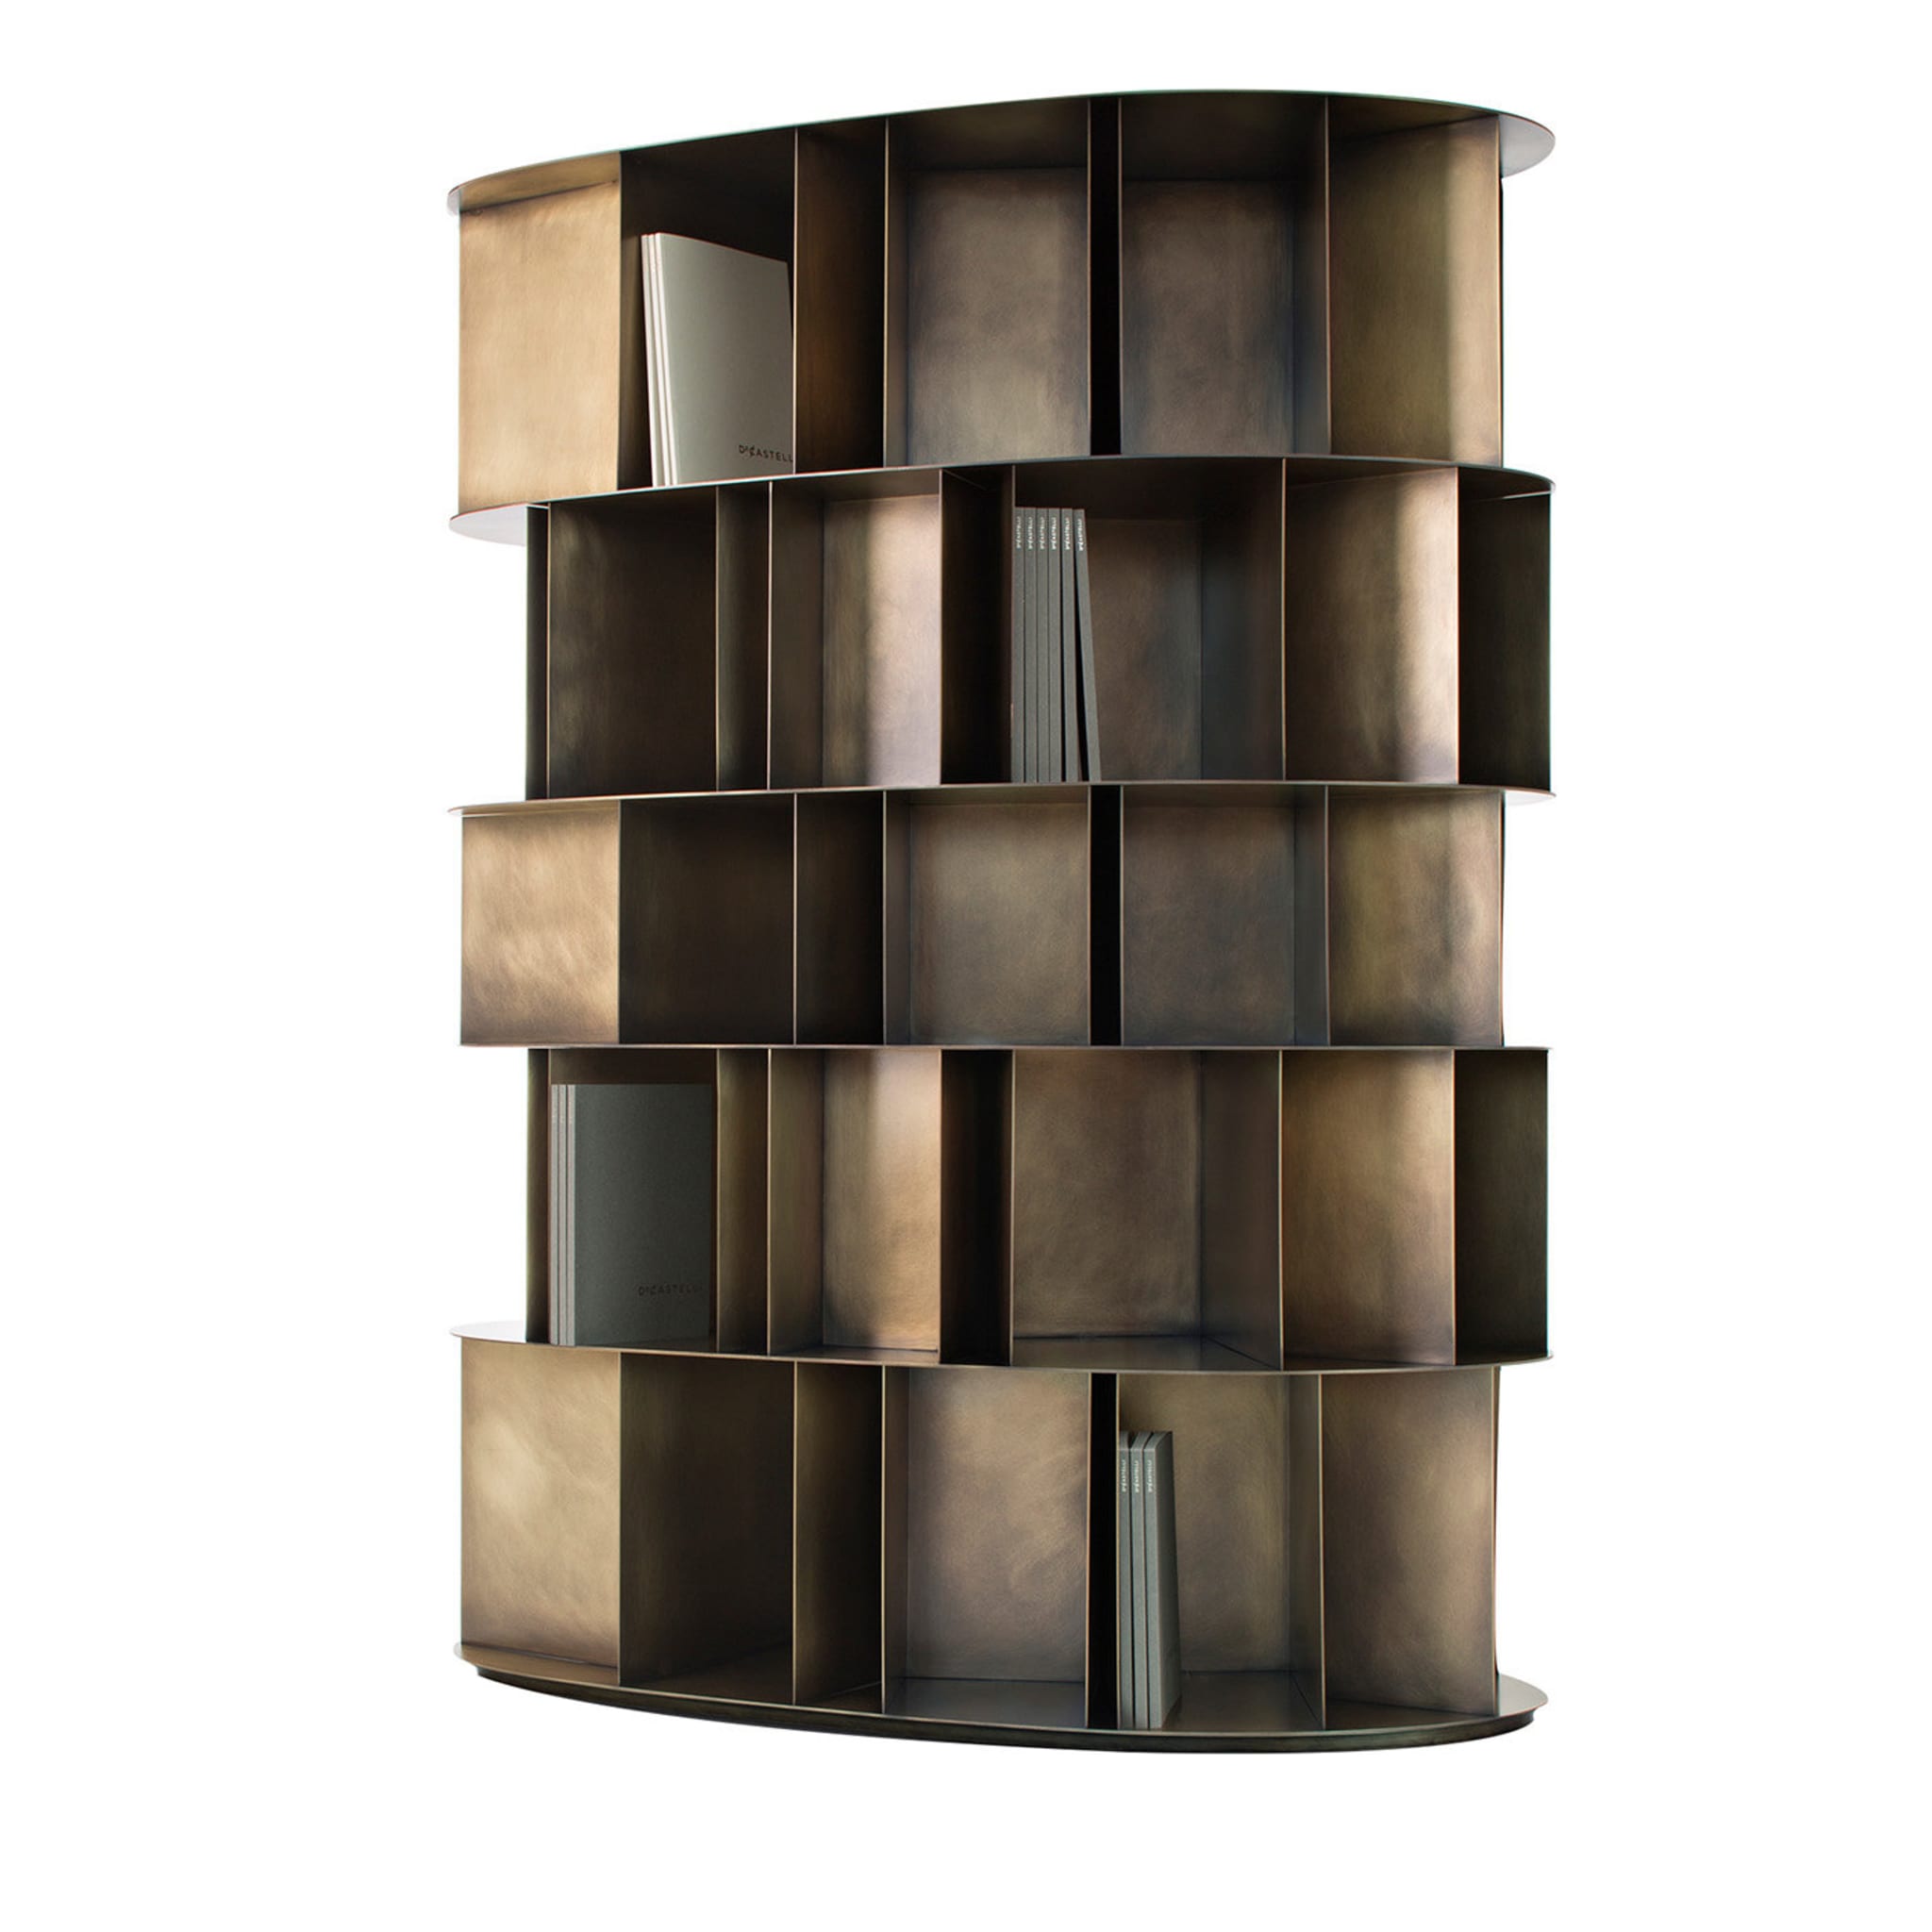 Existence Bookcase by Michele De Lucchi - Main view